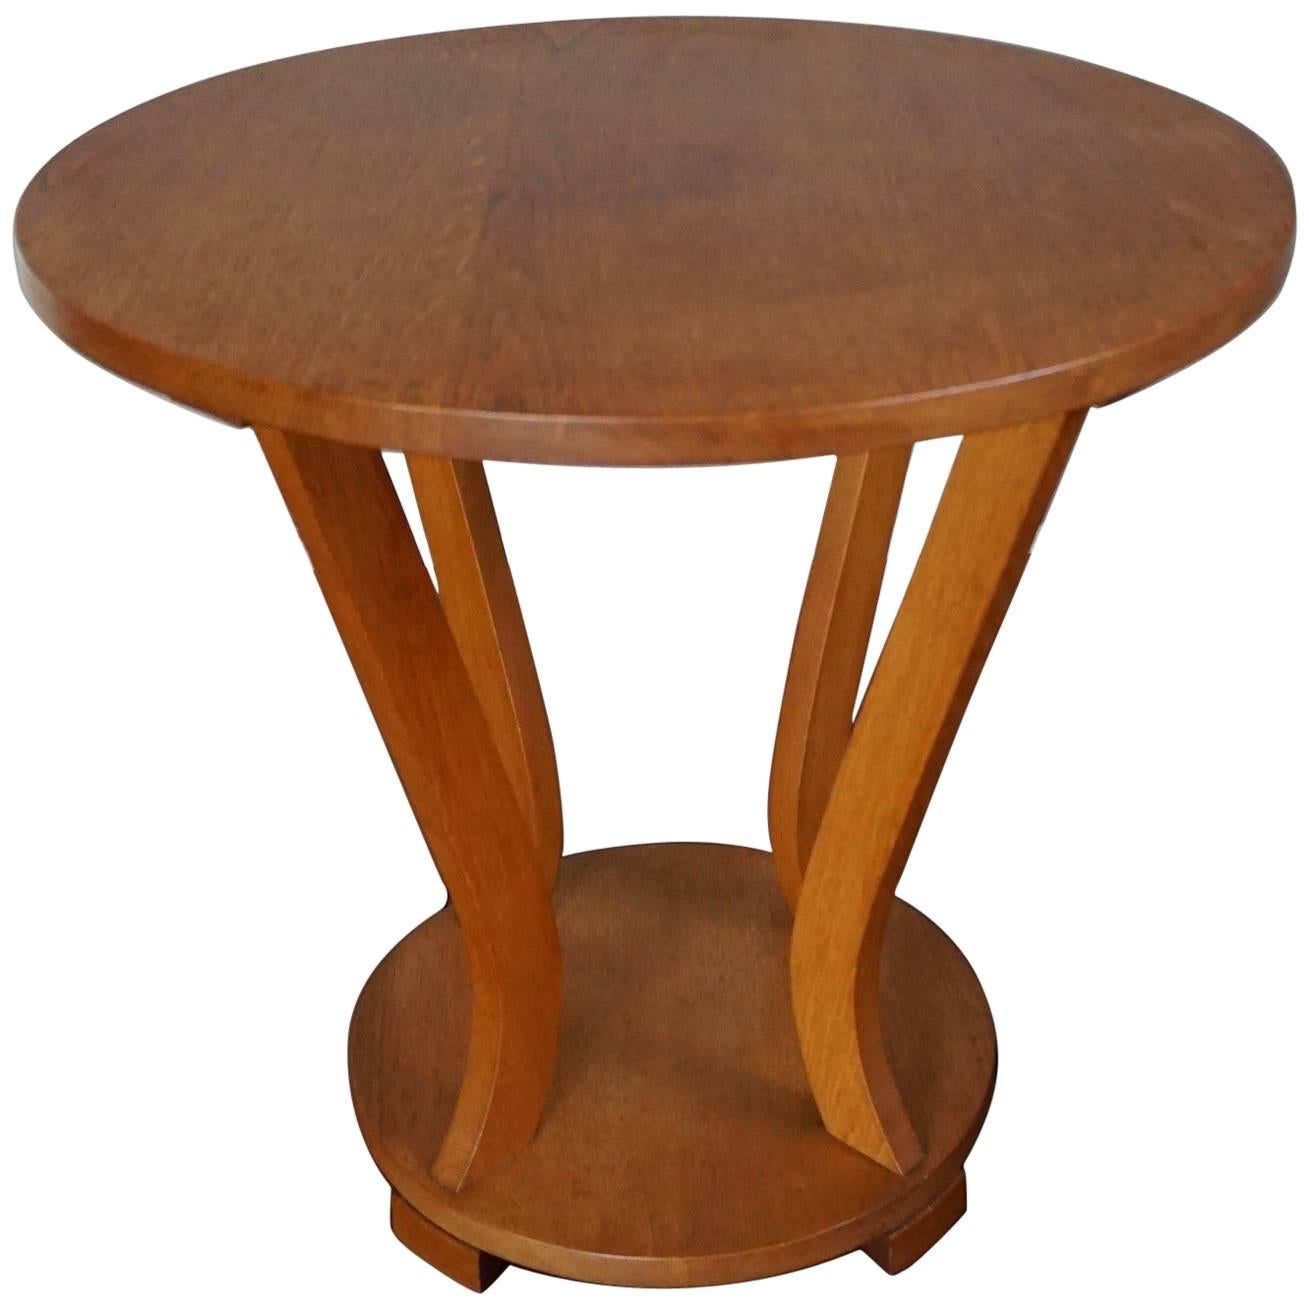 Early 20th Century, Circular Oak Art Deco Coffee Table or Side Table, 1920s